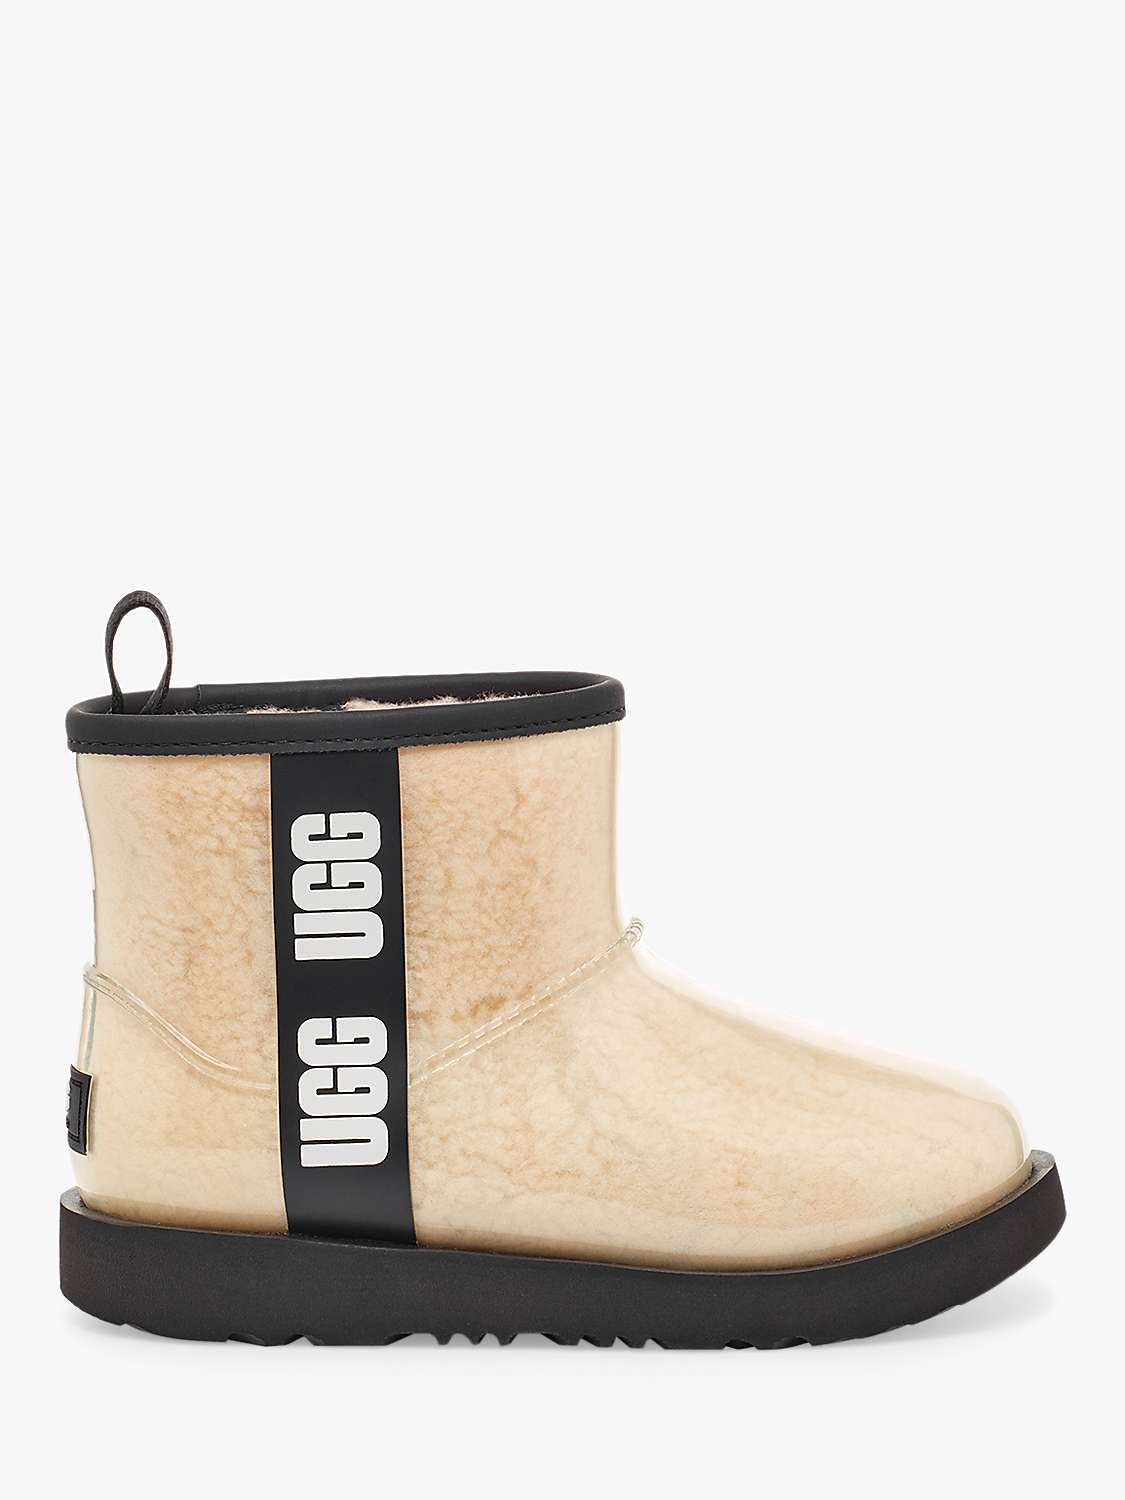 Buy UGG Kids' Classic Clear Mini II Boots, Neutral/Black Online at johnlewis.com